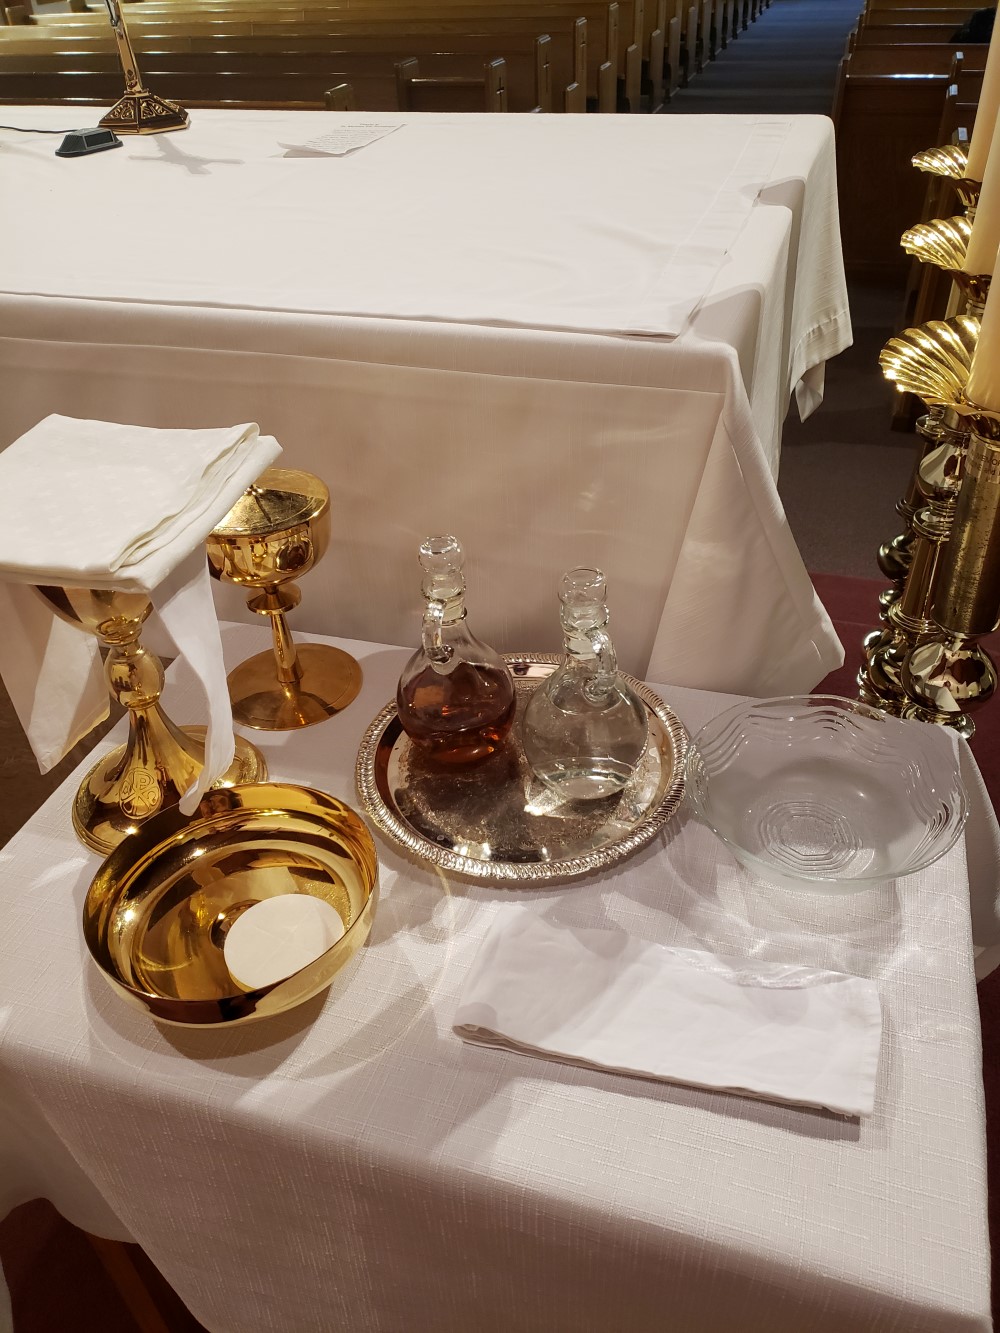 Mass items on credence table.